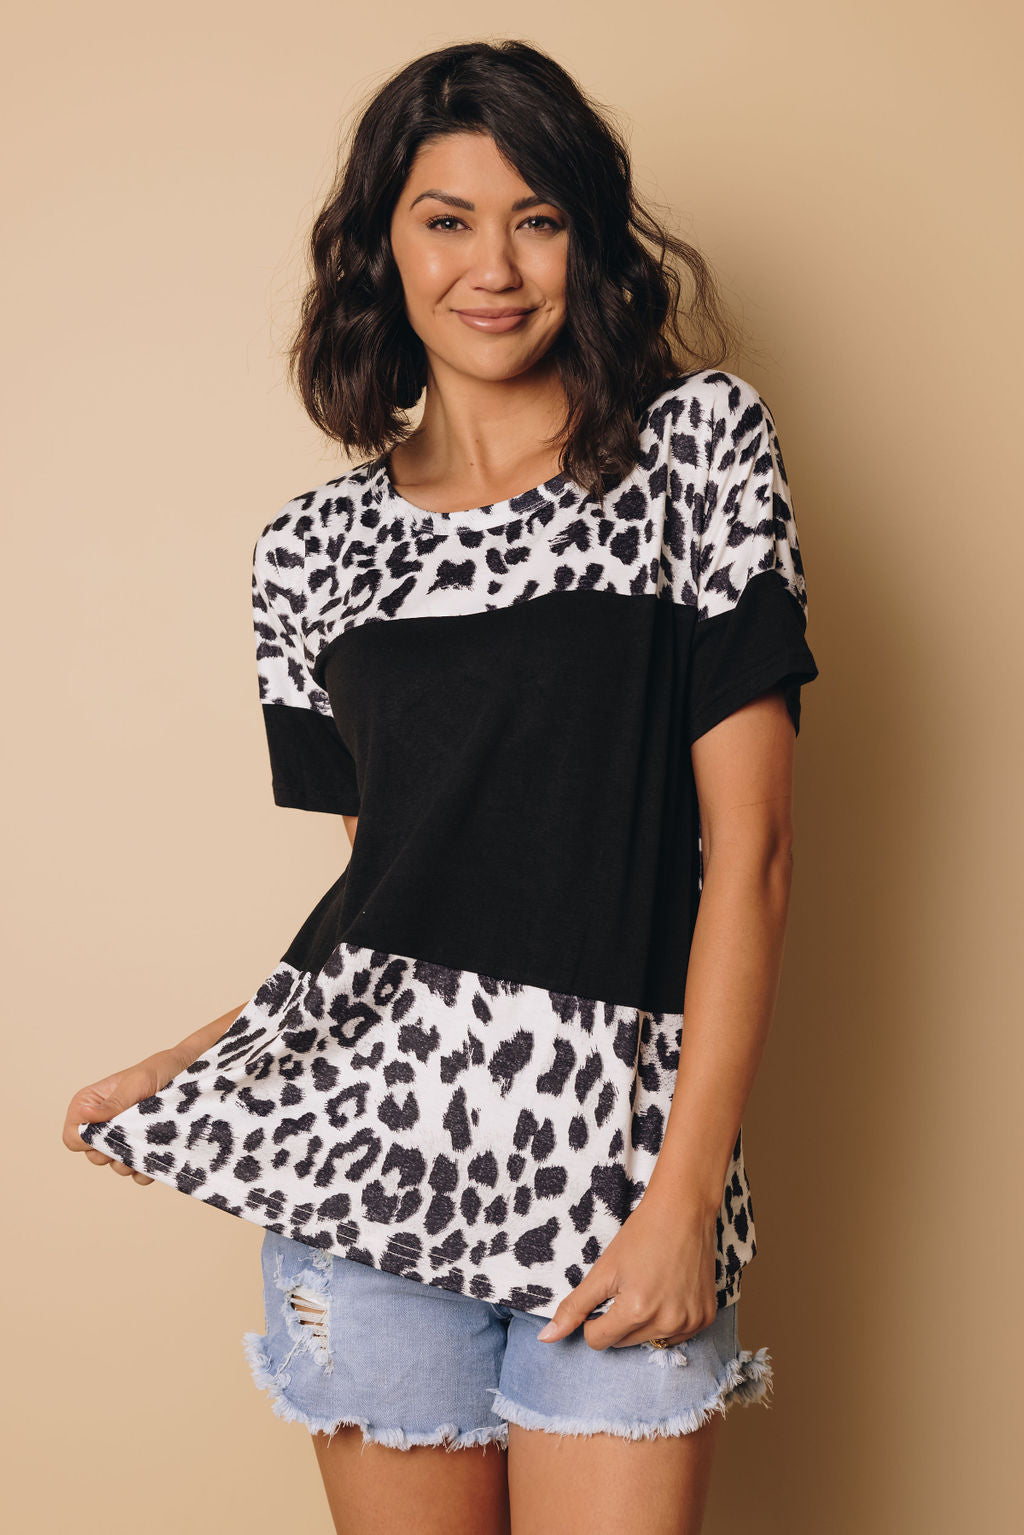 Be About It Leopard Colorblock Top